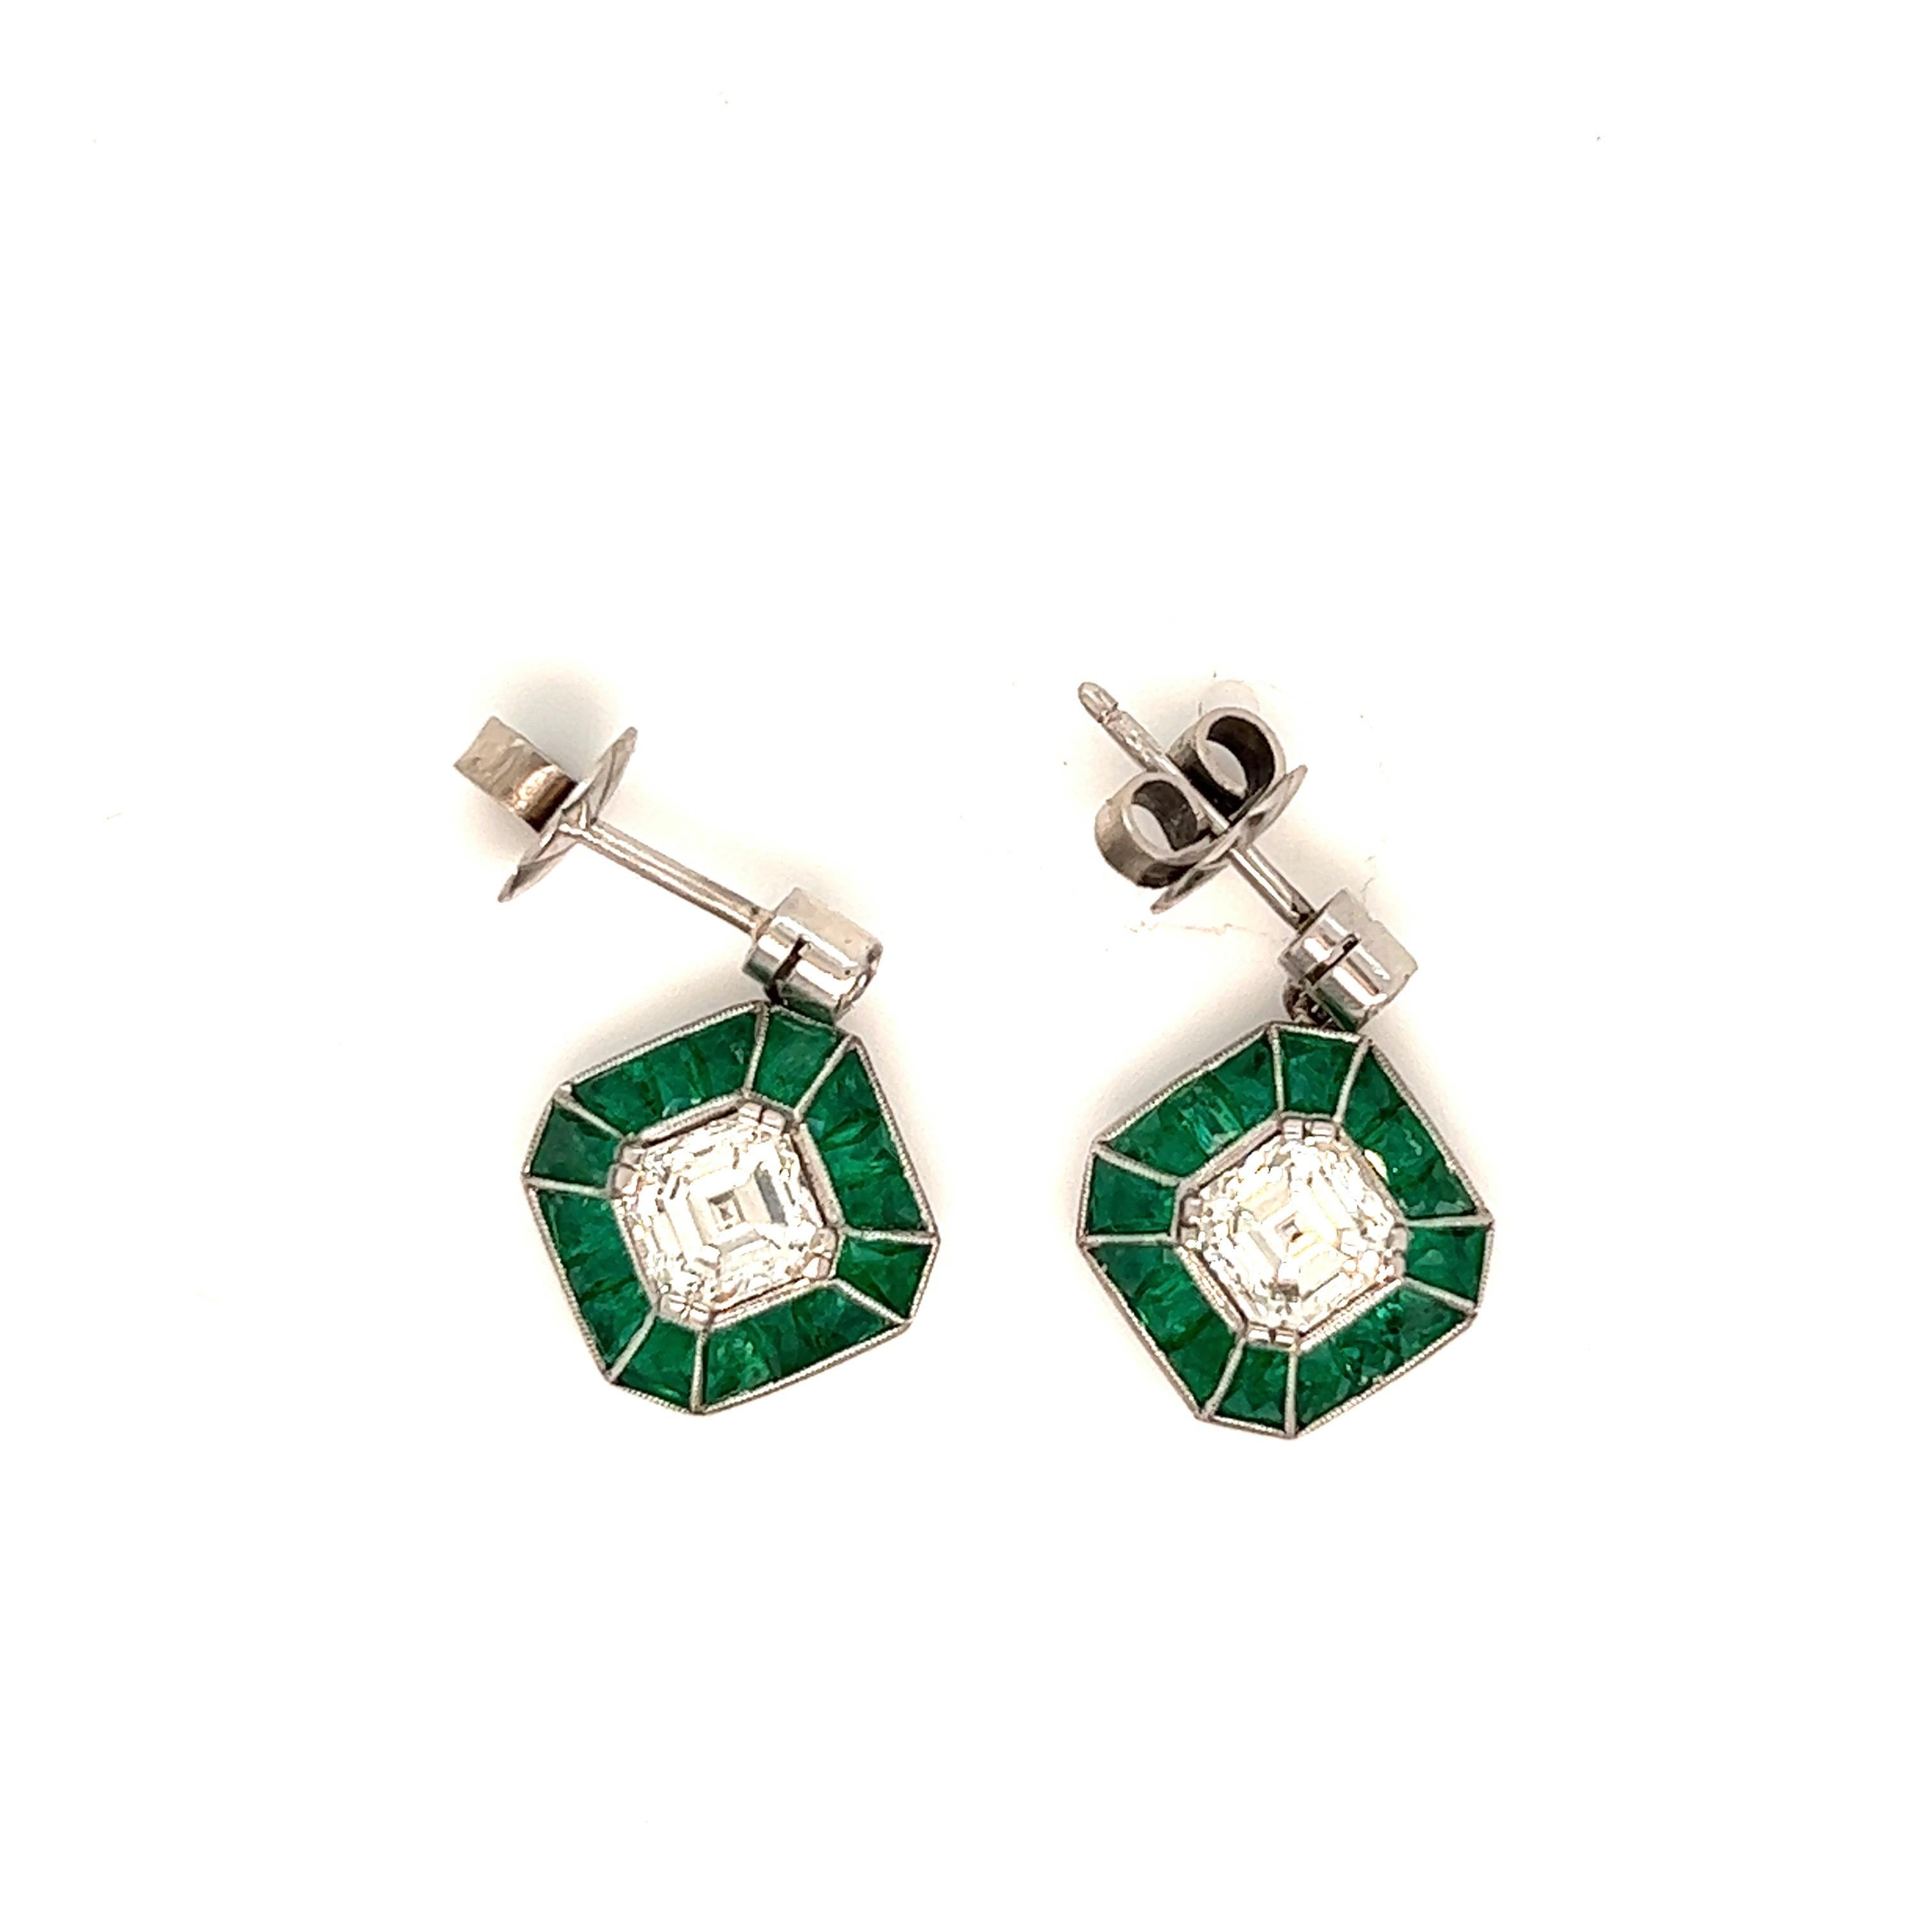 Art deco platinum and diamond earrings

Square emerald-cut diamonds of approximately 2.20 carat, framed by calibre-cut emeralds; platinum

Size: width 1.3 cm, length 1.6 cm
Total weight: 6.9 grams